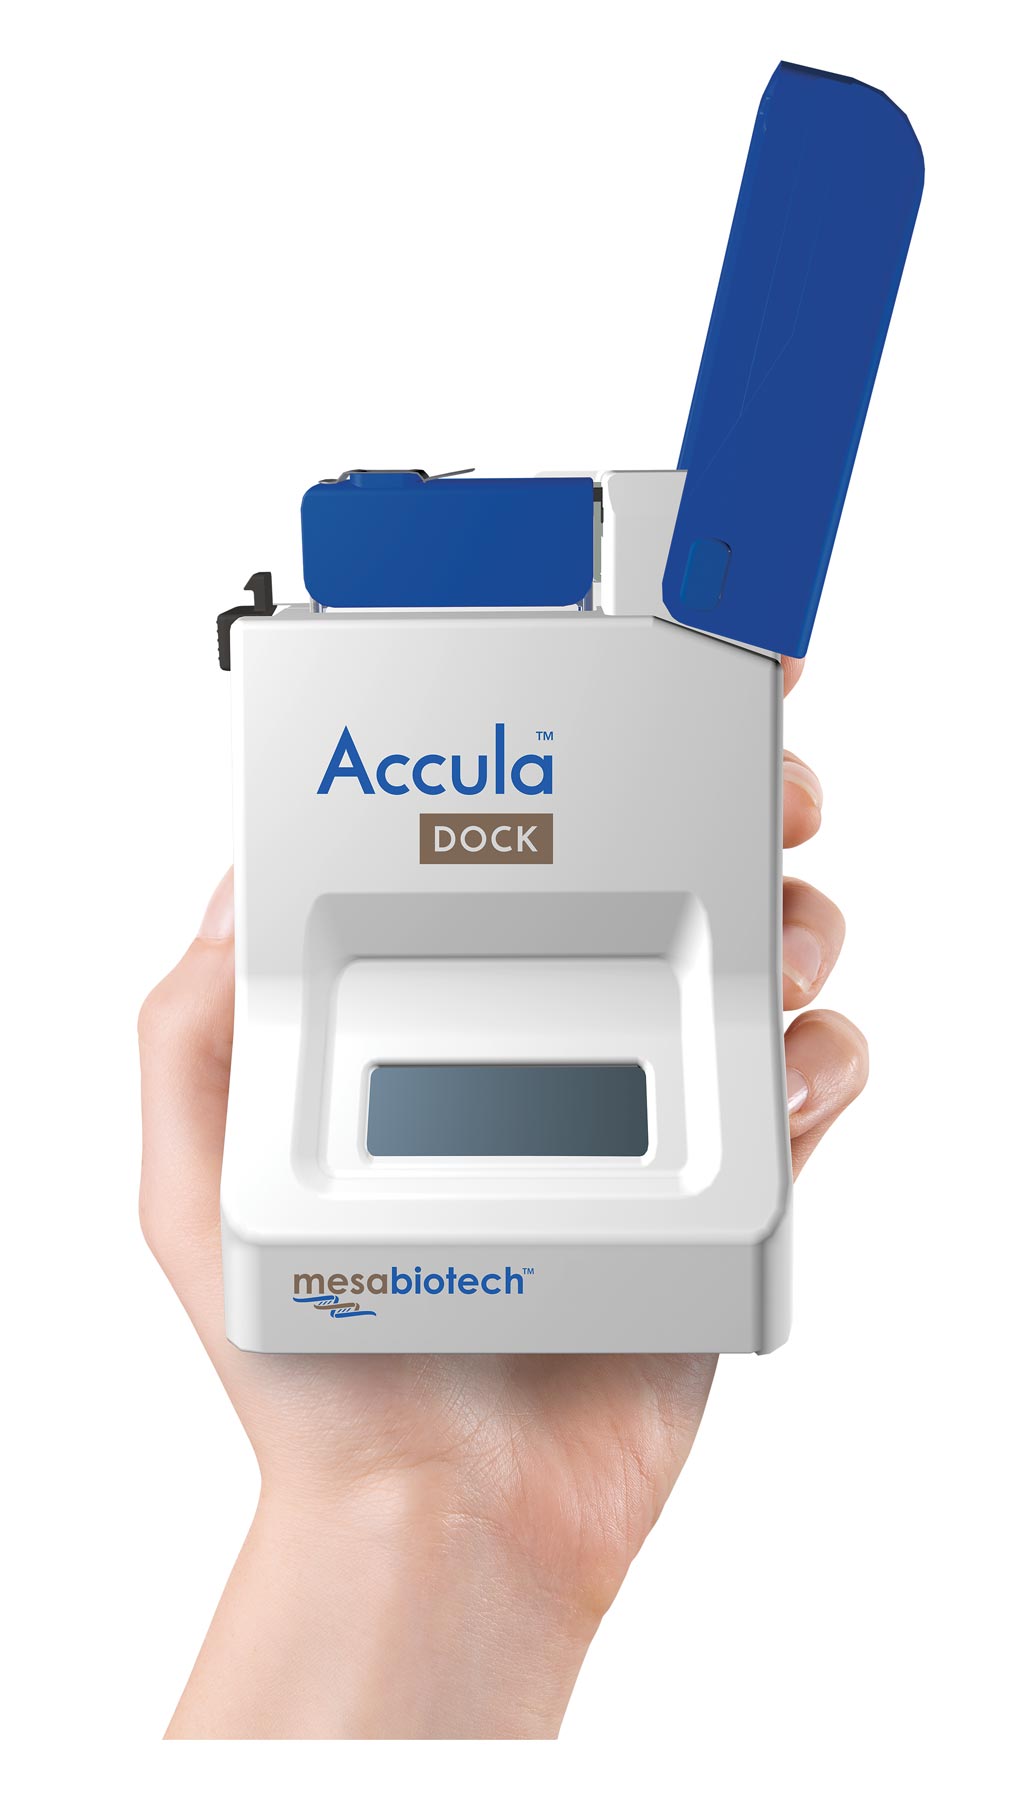 Image: The Accula Dock system (Photo courtesy of Mesa Biotech).